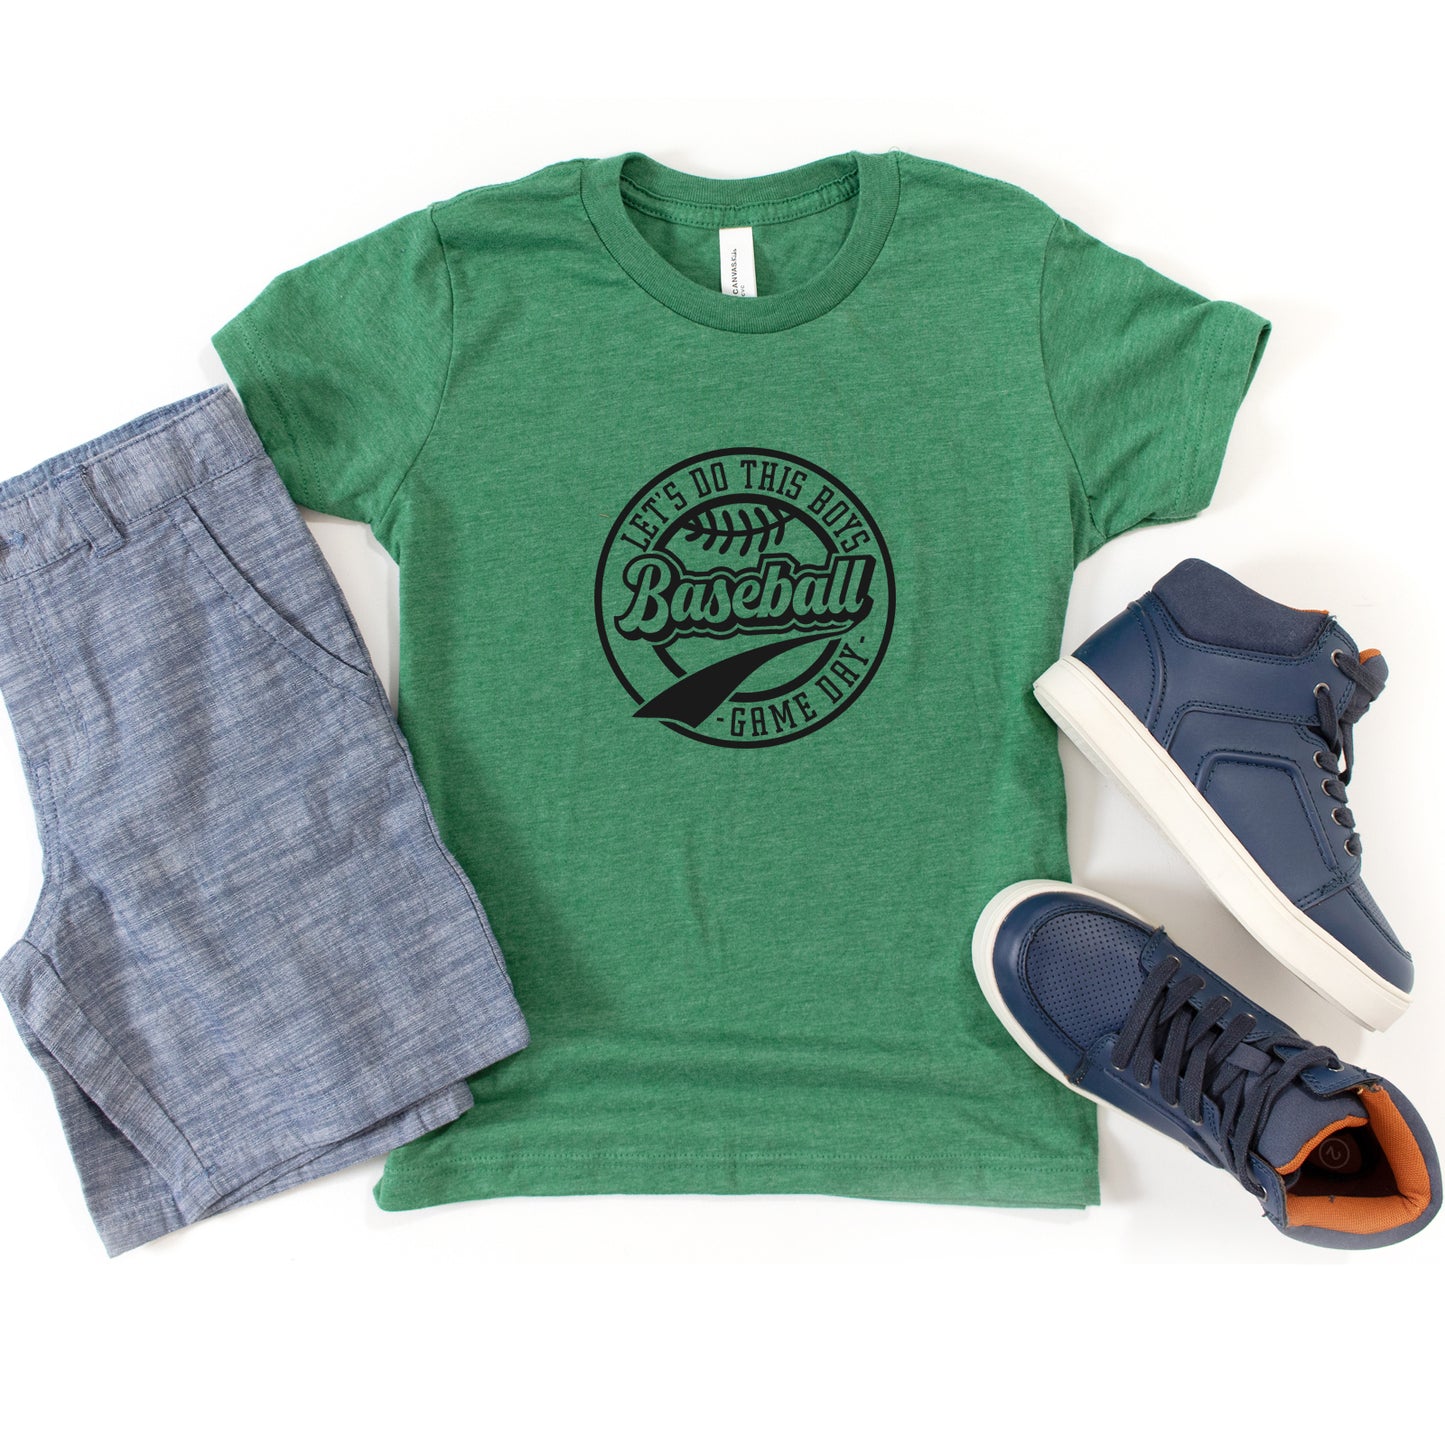 Let's Do This Boys Game Day | Youth Short Sleeve Crew Neck